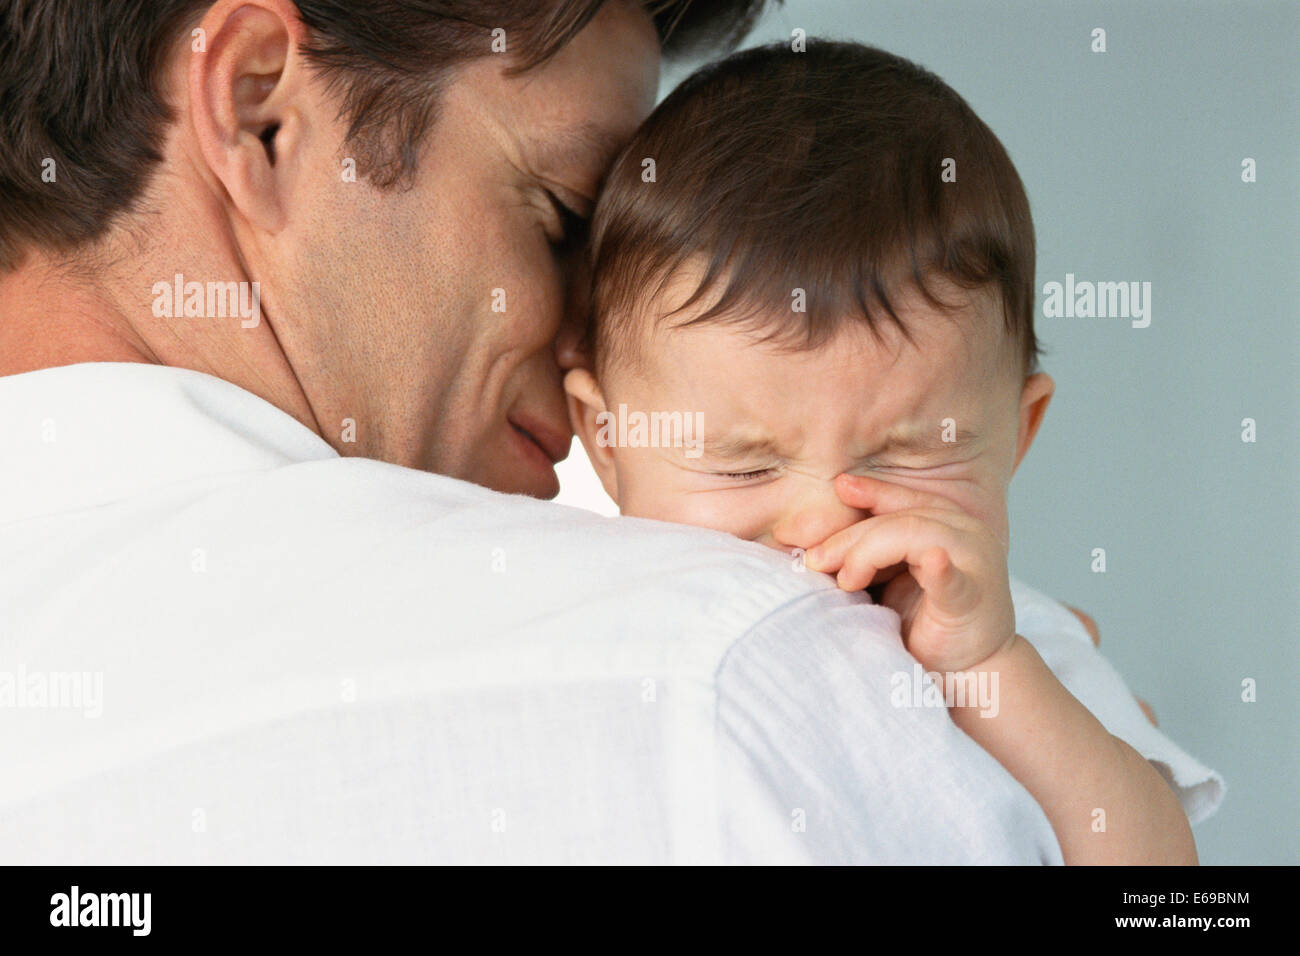 Father comforting crying baby Stock Photo